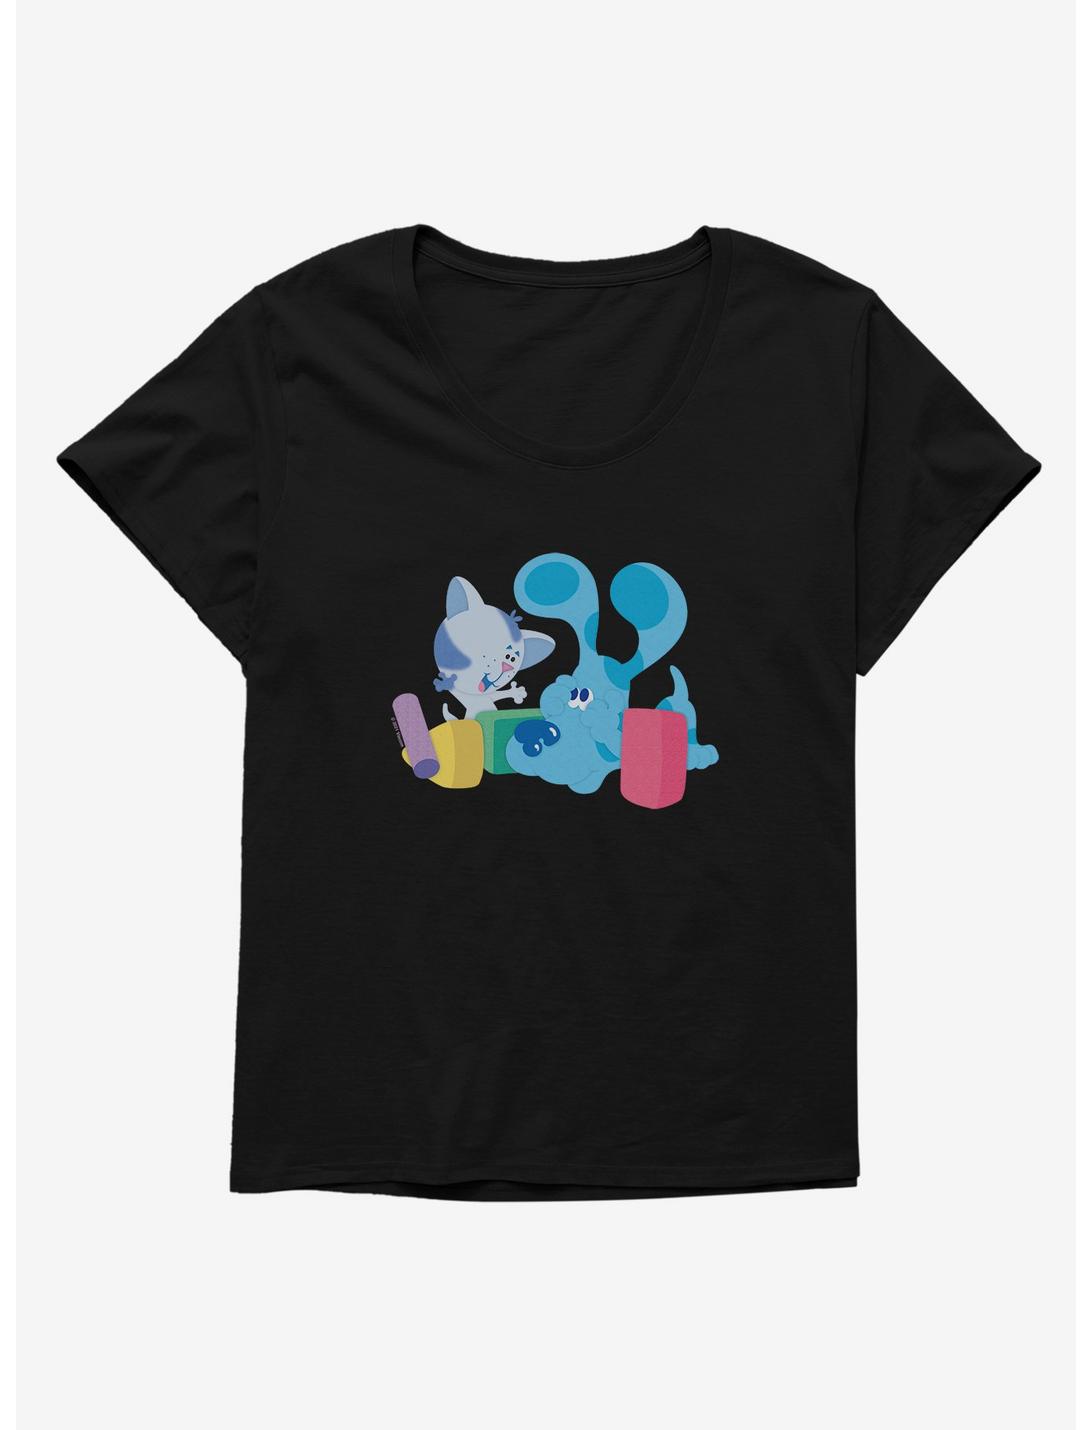 Blue's Clues Periwinkle And Blue Playtime Girls T-Shirt Plus Size, , hi-res